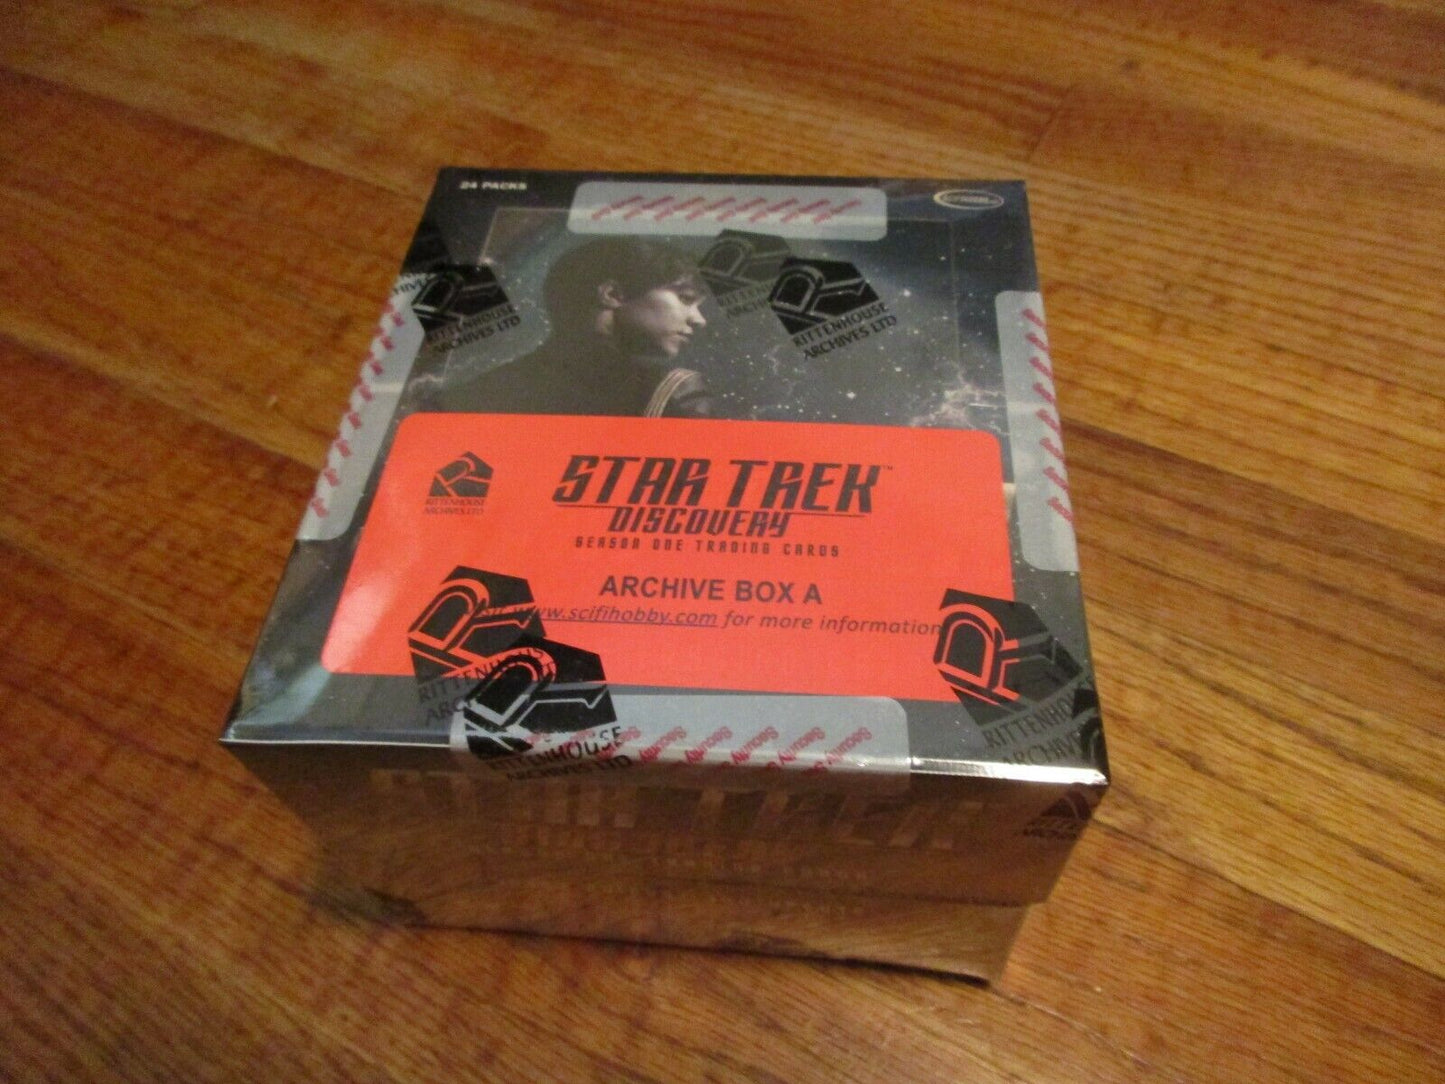 Star Trek Discovery Season 1 Trading Cards Factory Sealed ARCHIVE BOX (2019 Rittenhouse Archives)